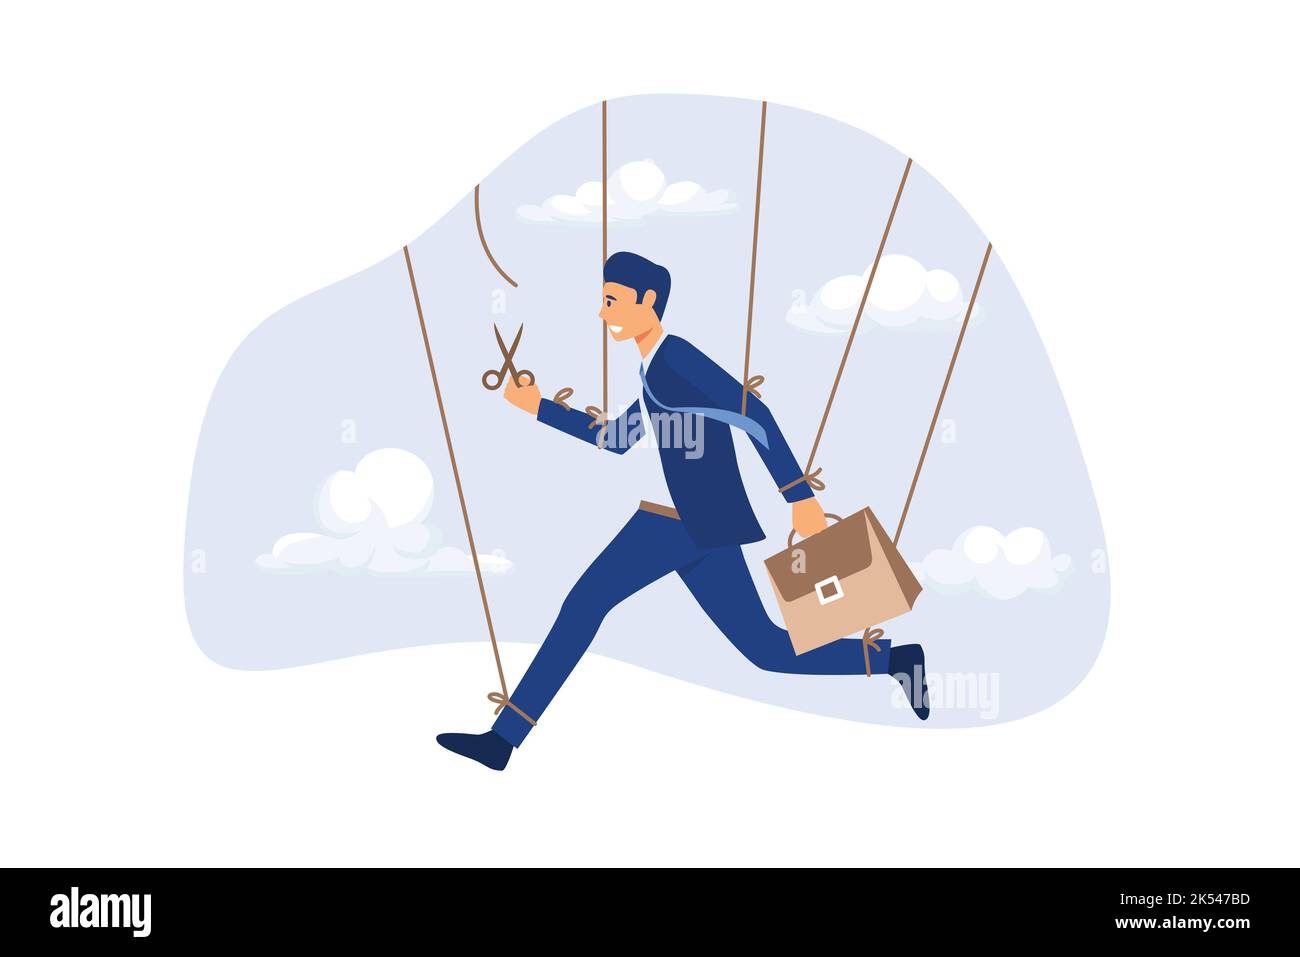 Freedom for work and decision making, authority to work independently, stop micromanagement, or people manipulation concept, businessman marionette, p Stock Vector